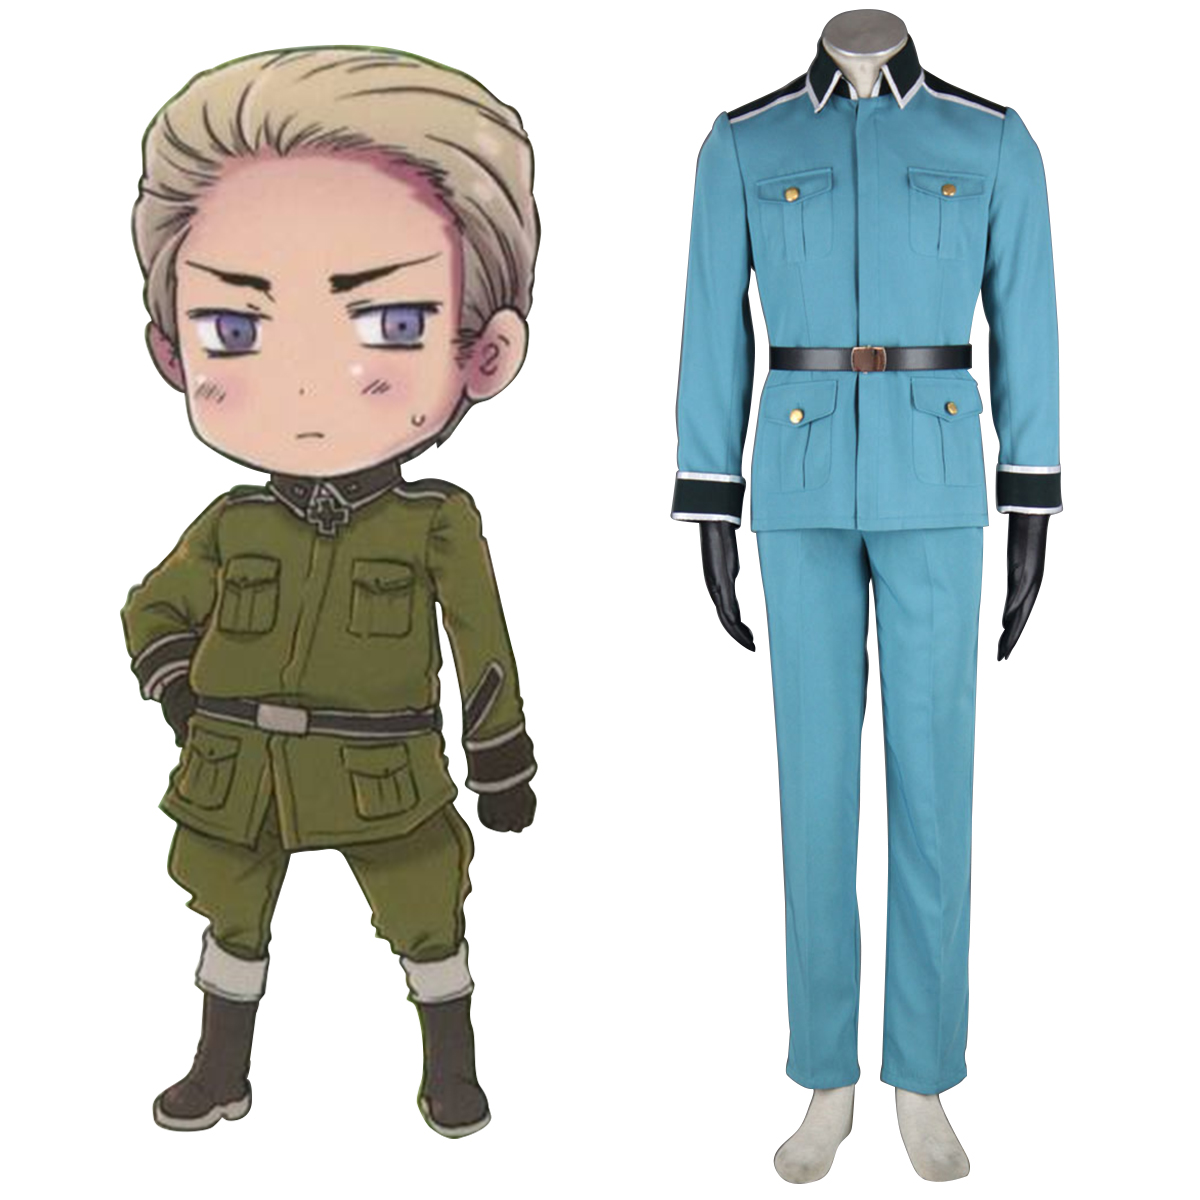 Axis Powers Hetalia Germany 1 Military Uniform Anime Cosplay Costumes Outfit